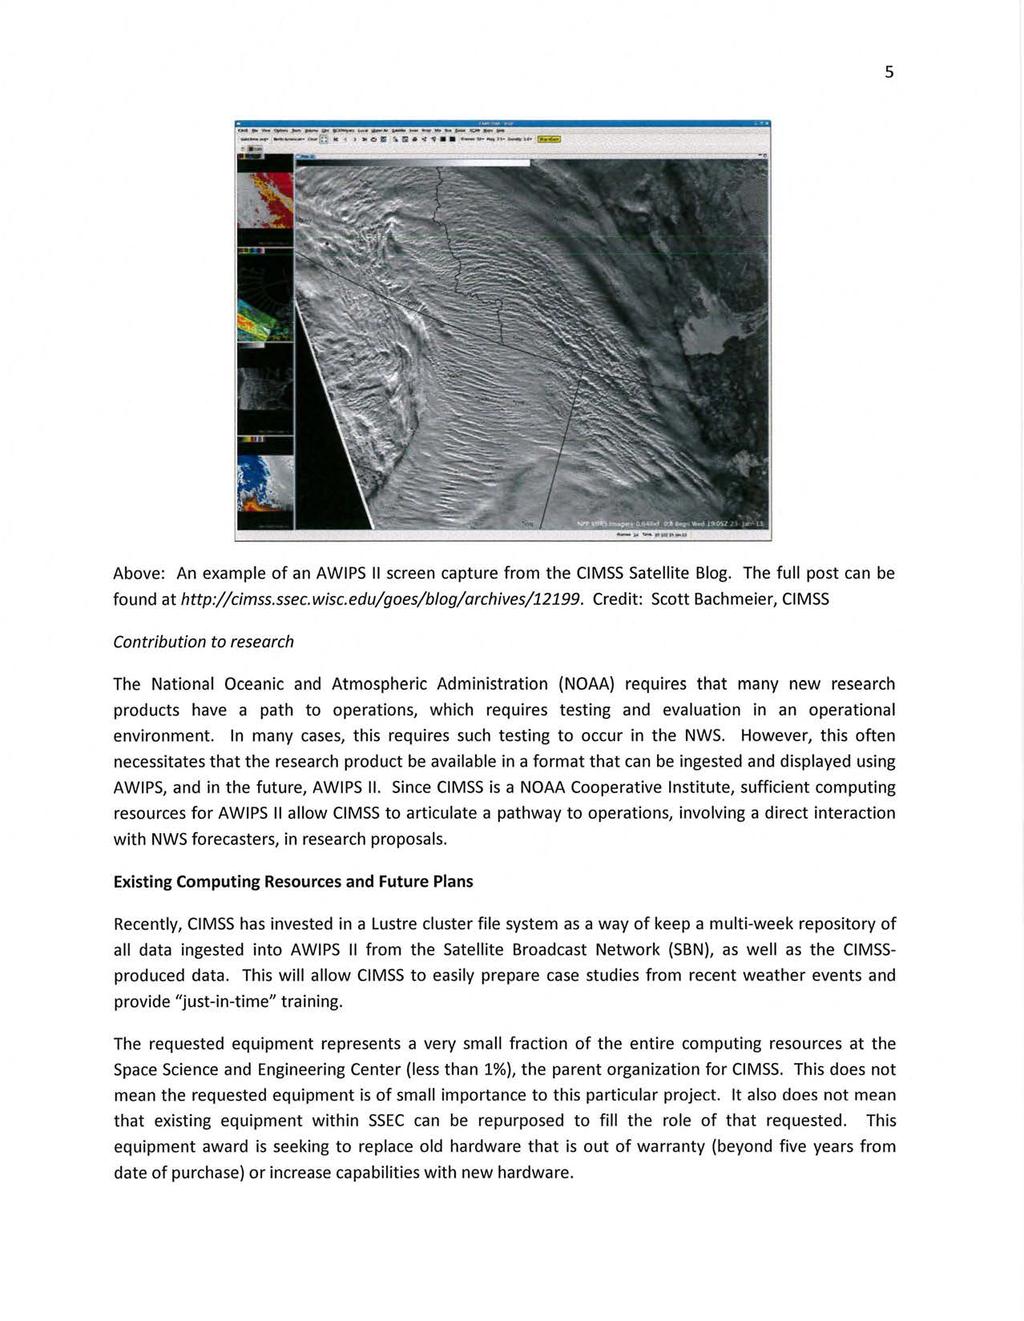 5 Above: An example of an AWIPS II screen capture from the CIMSS Satellite Blog. The full post can be found at http://cimss.ssec.wisc.edu/goes/blog/archives/12199.